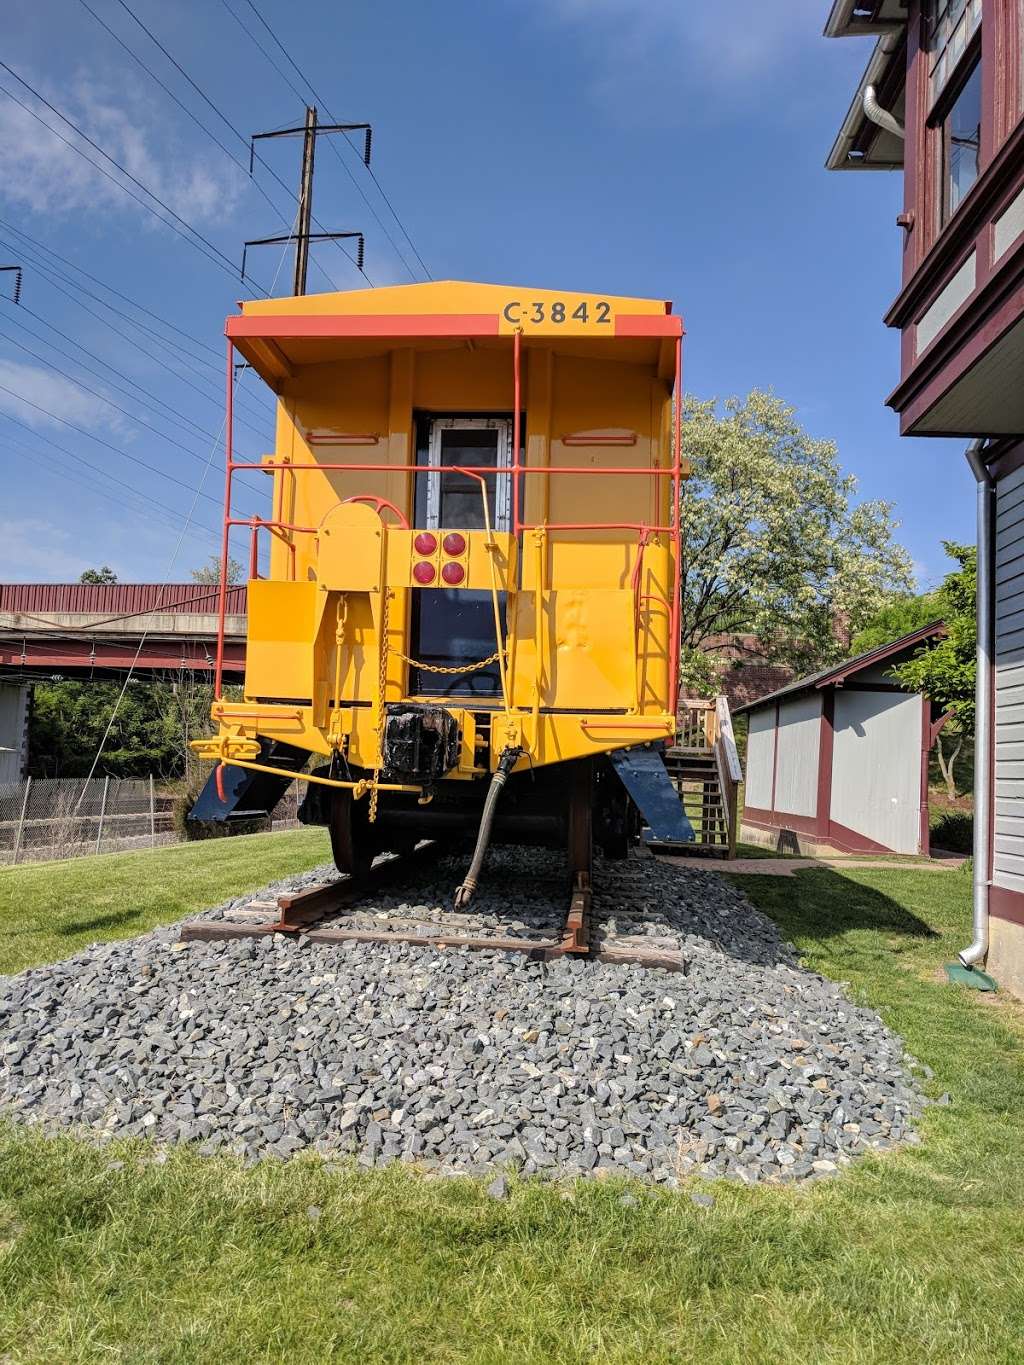 Bowie Railroad Museum | 8614 Chestnut Ave, Bowie, MD 20715, USA | Phone: (301) 809-3089